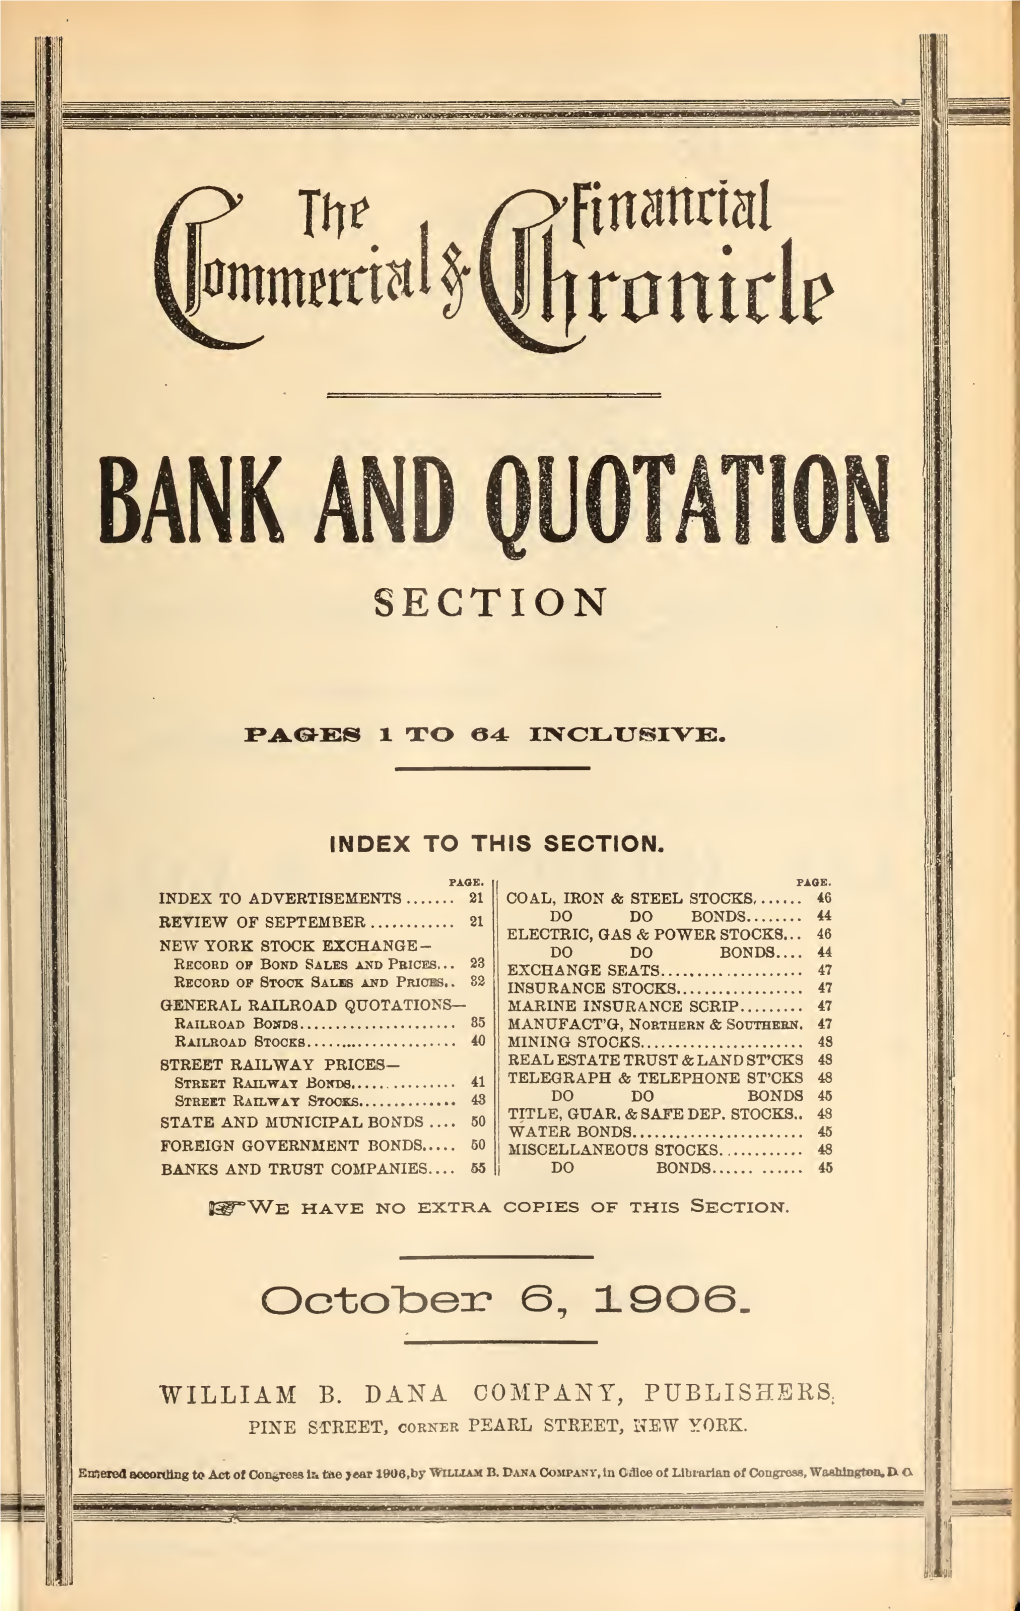 October 6, 1906: Bank and Quotation Section, Vol. 83, No. 2154